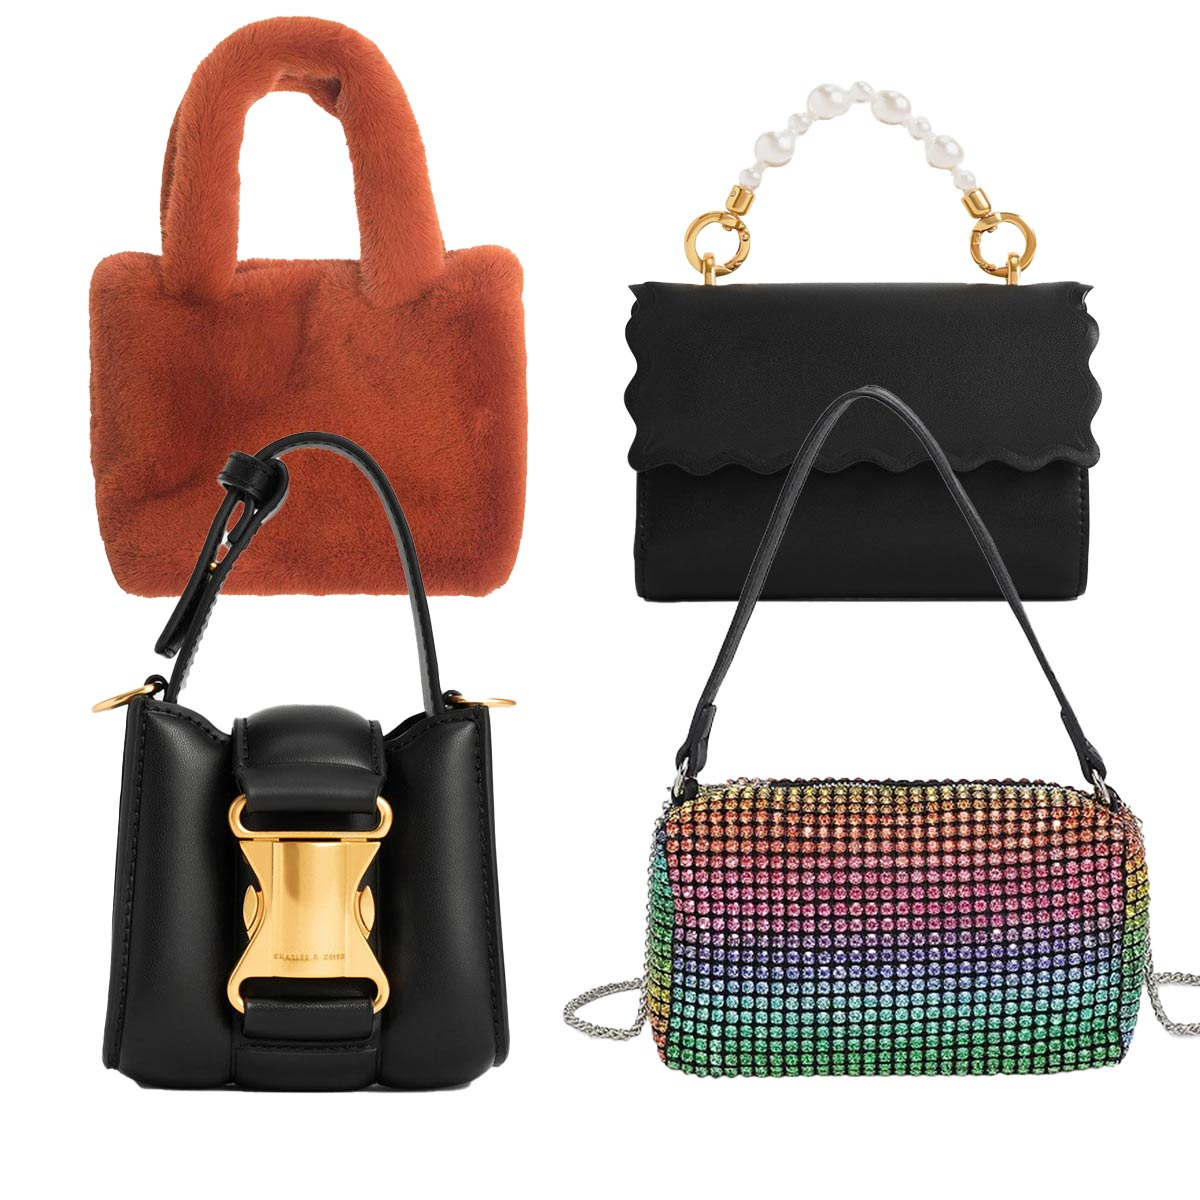 34 Edgy Micro Bags That Make a Big Style Statement